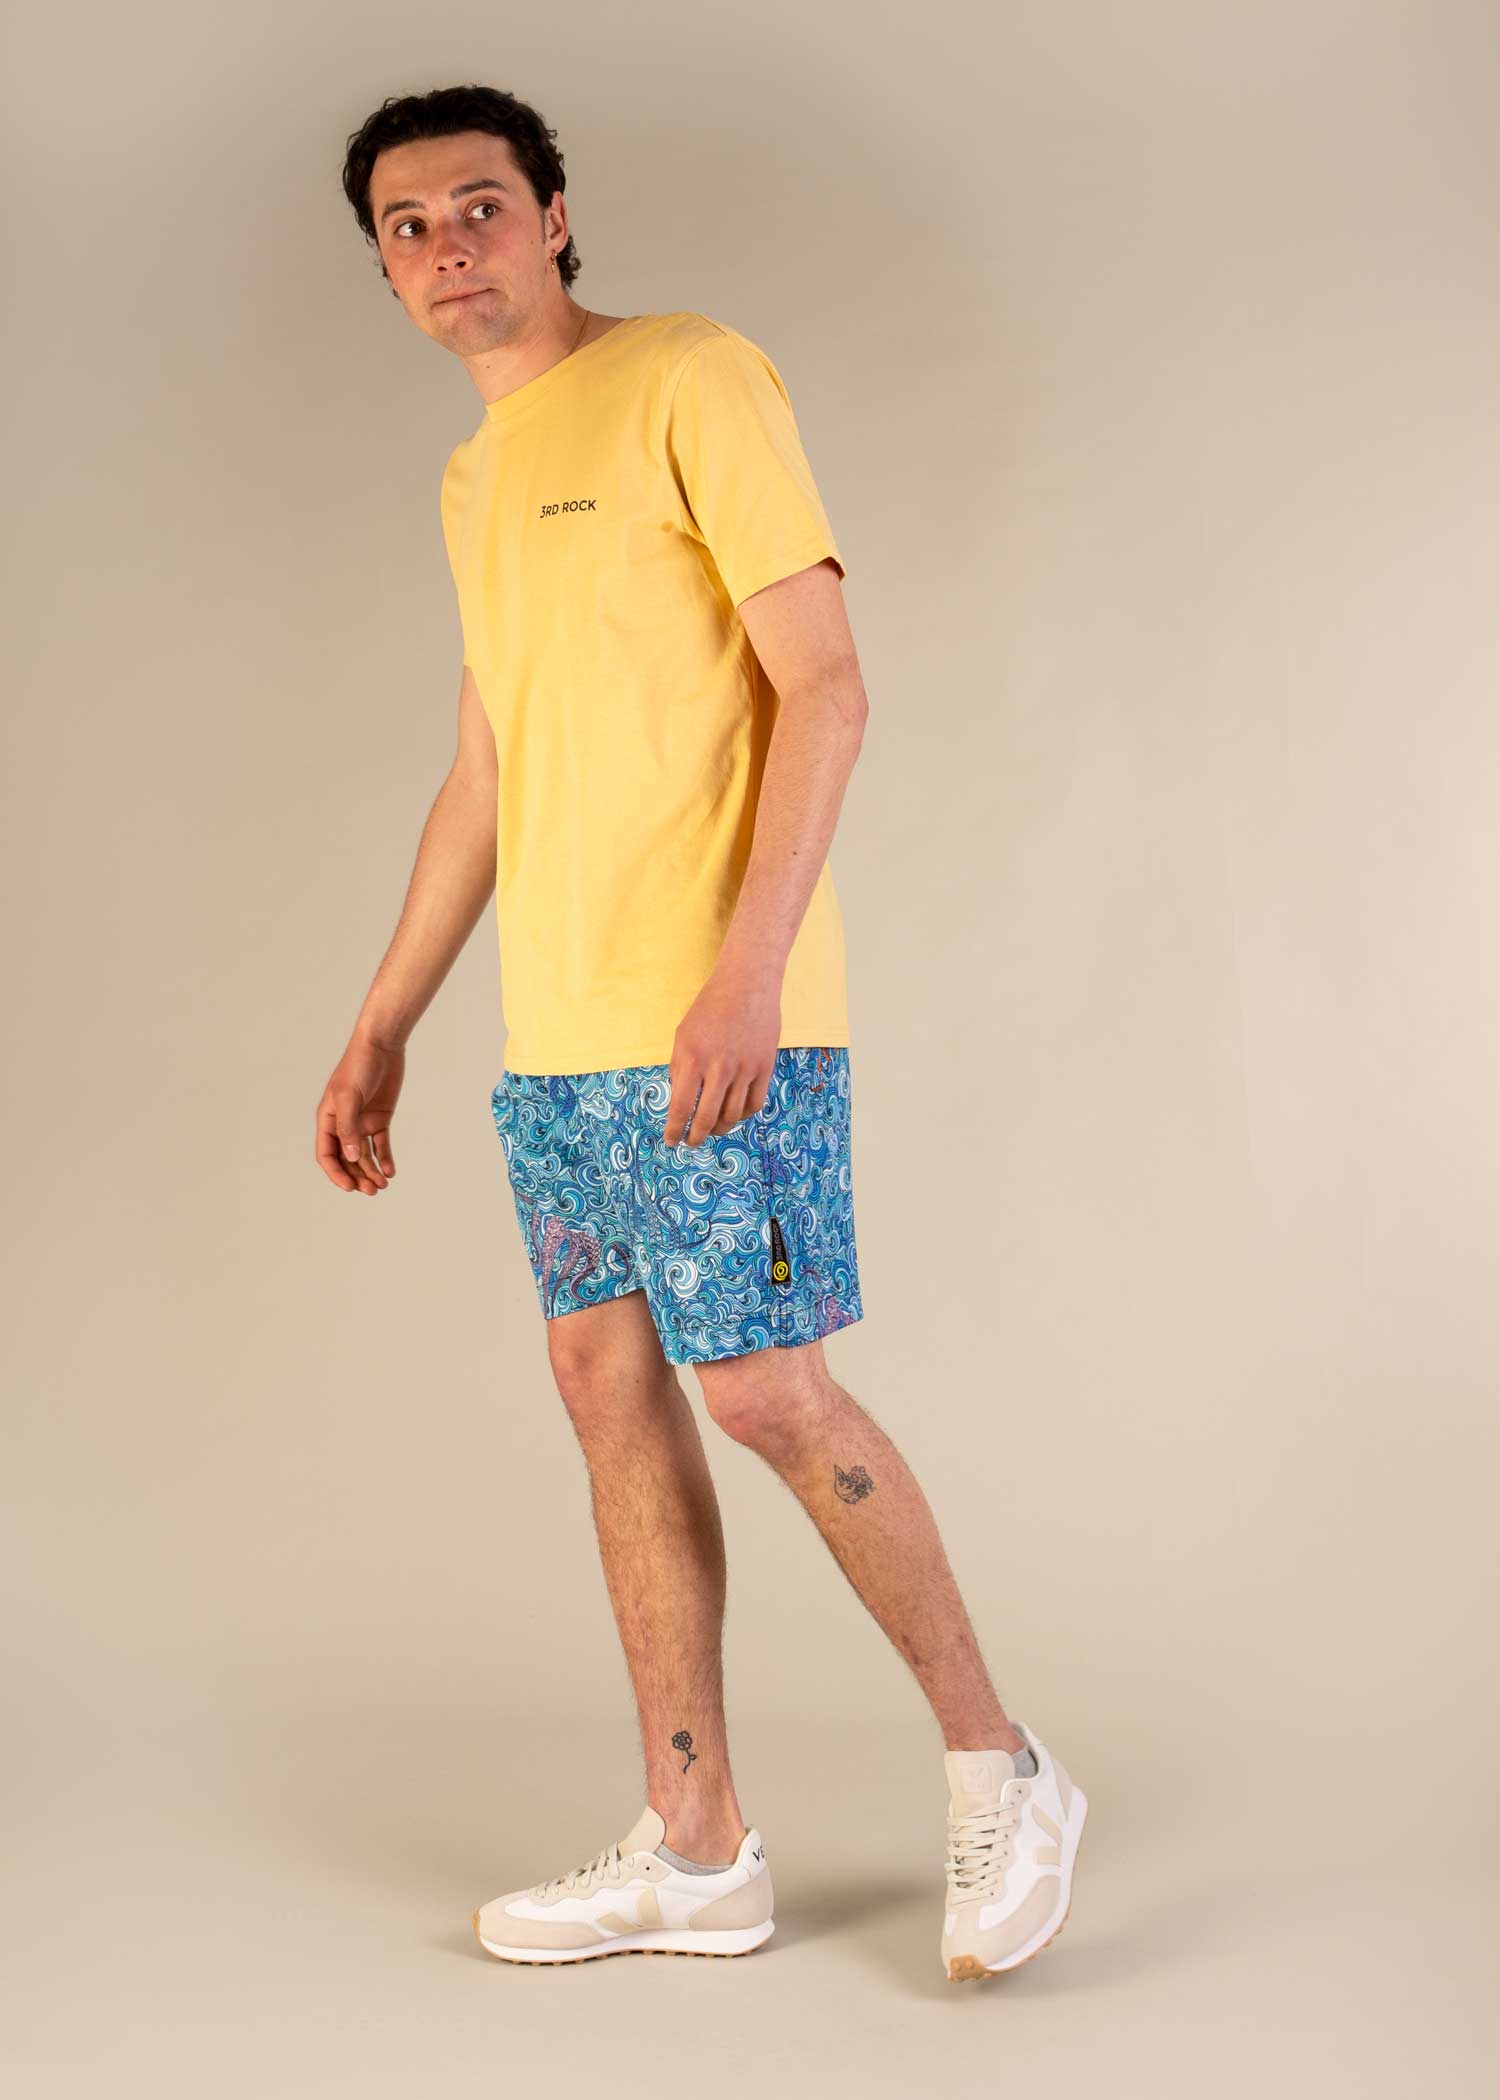 3RD ROCK Adventure shorts for summer - Kai is 6ft 1" with a 32" waist and is wearing a 32. M